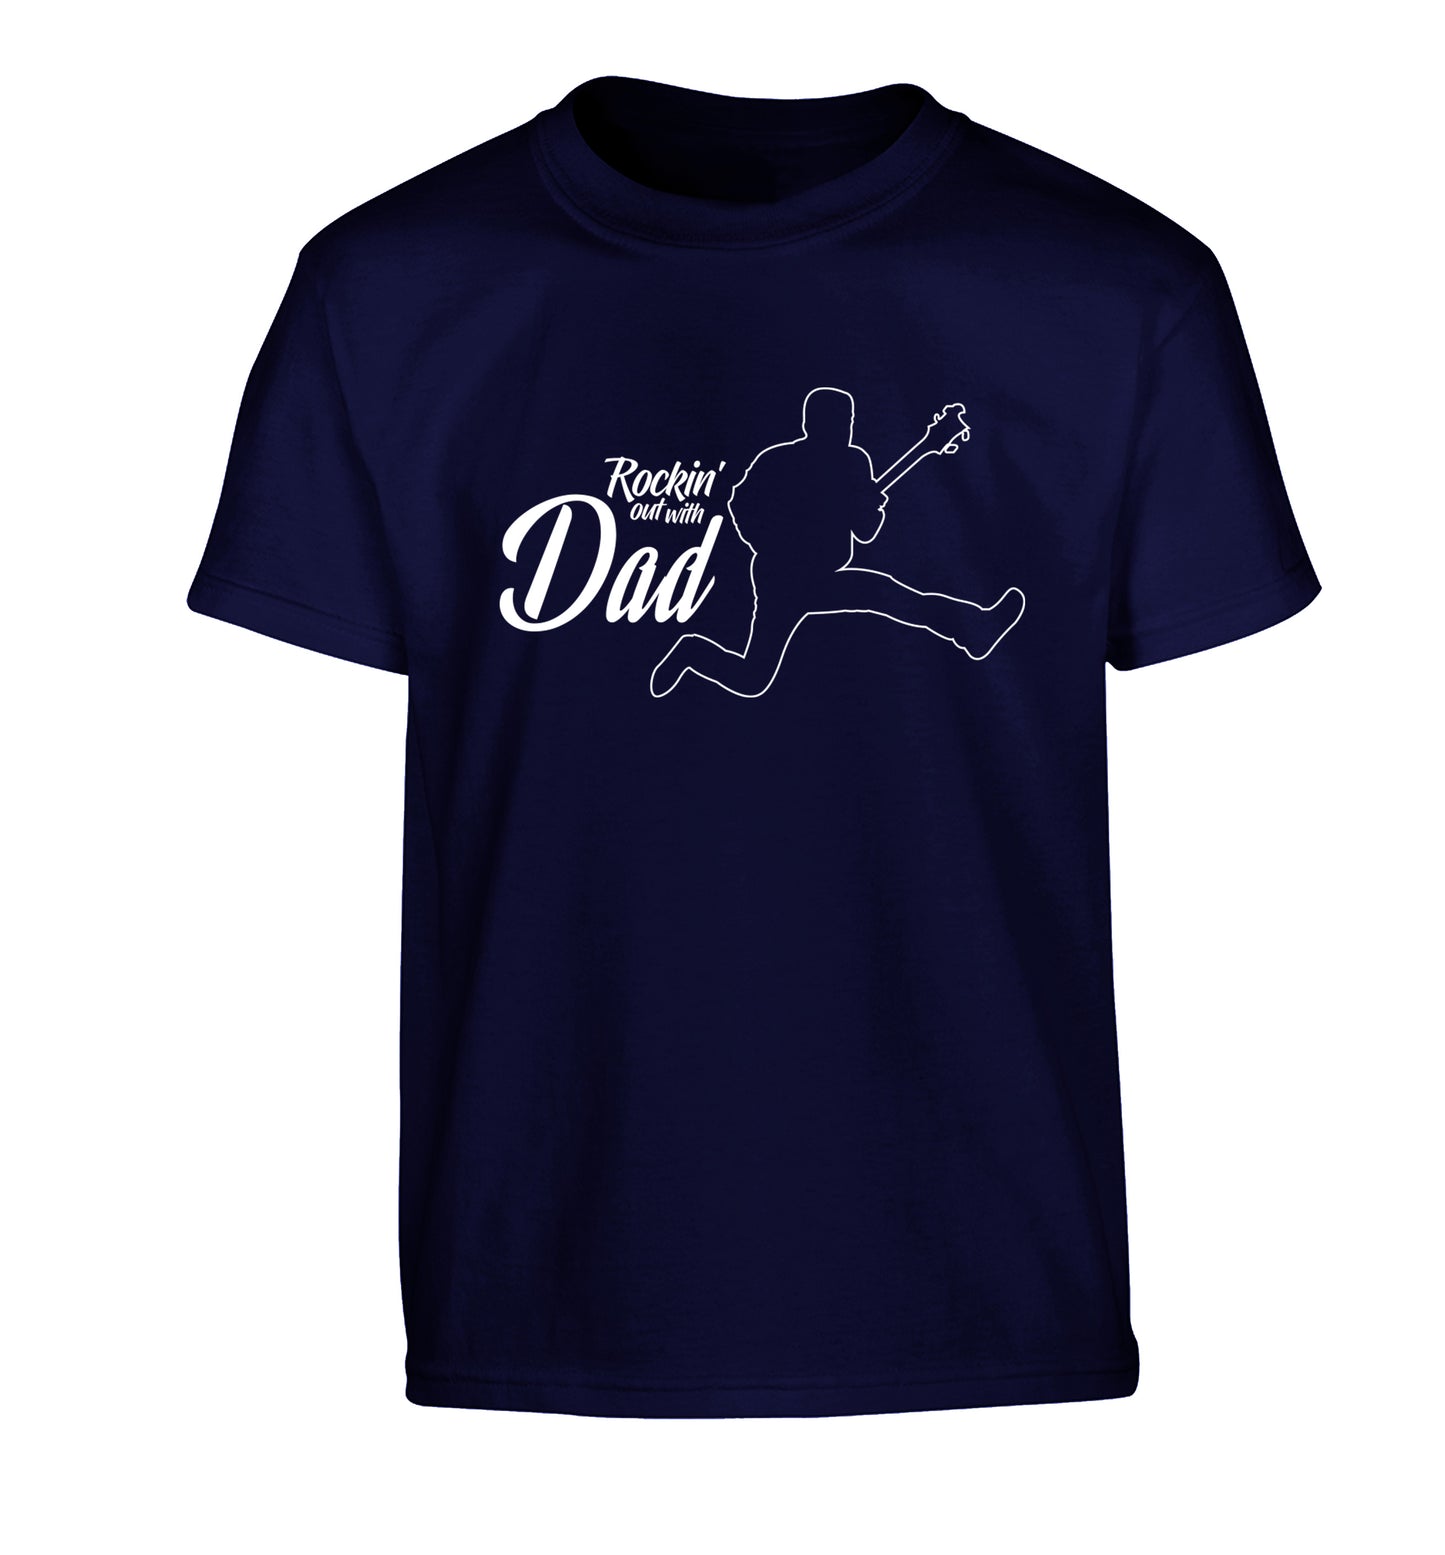 Rockin out with dad Children's navy Tshirt 12-13 Years